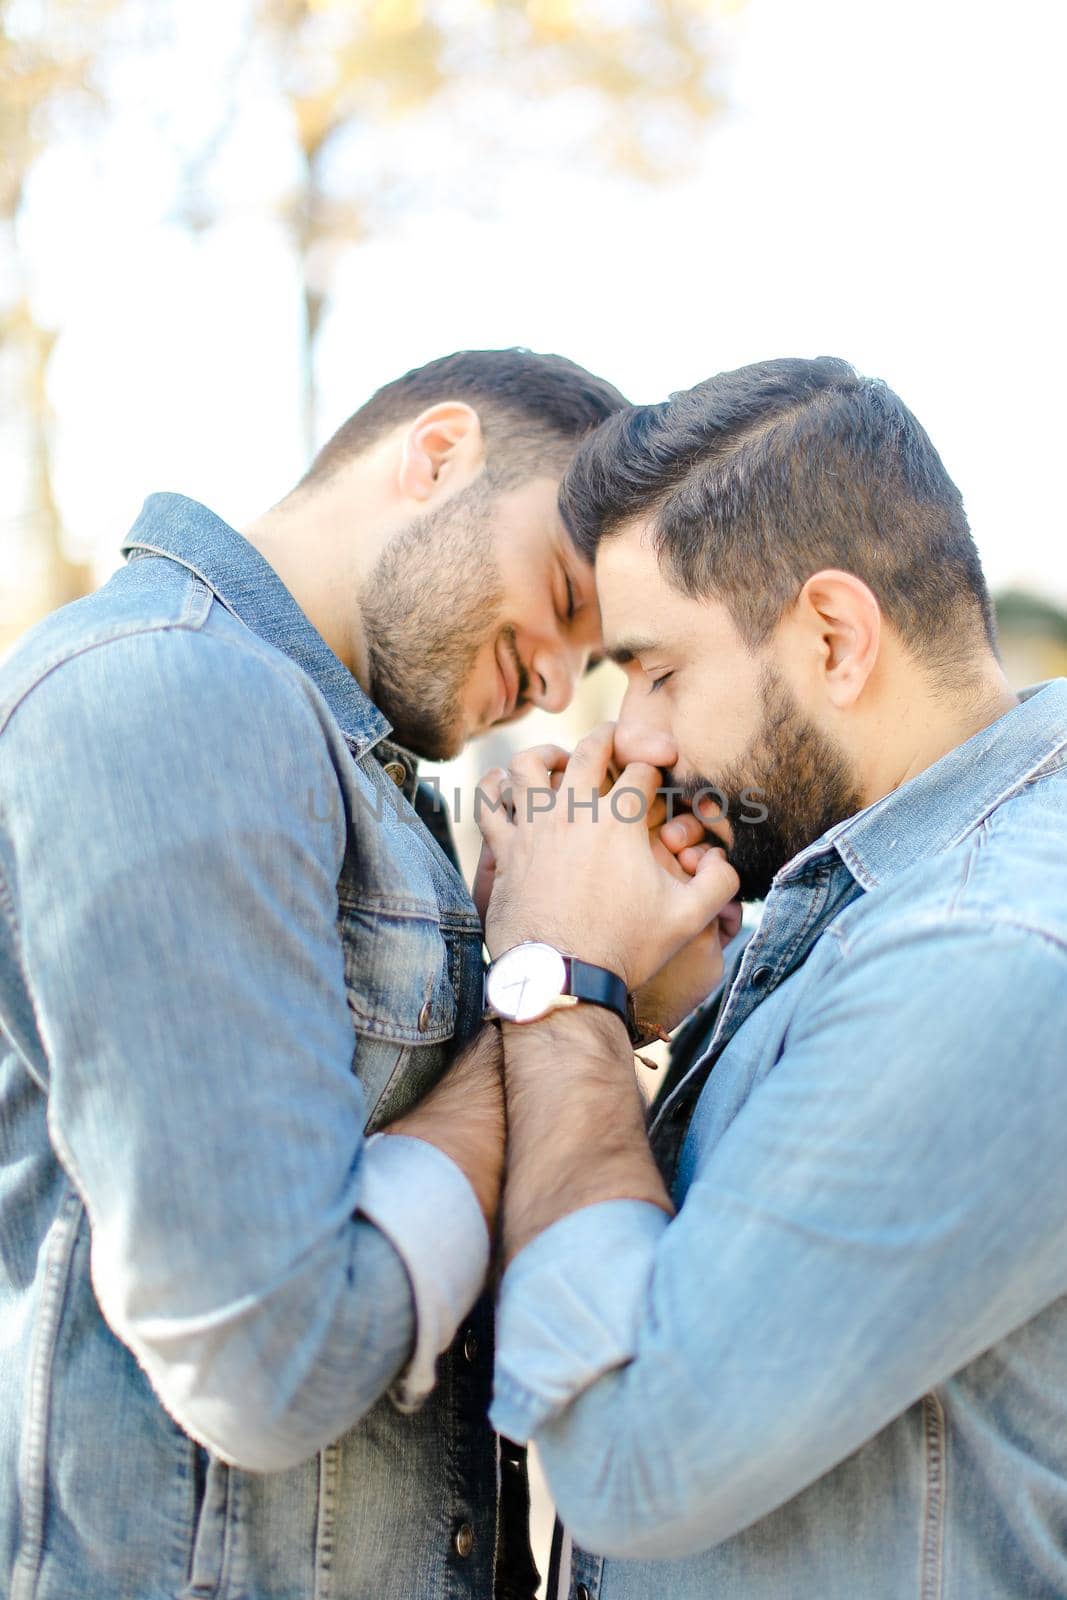 Portrait of young happy handsome gays holding hands and wearing jeans shirts. Concept of realtionship and same sex couple, lgbt.